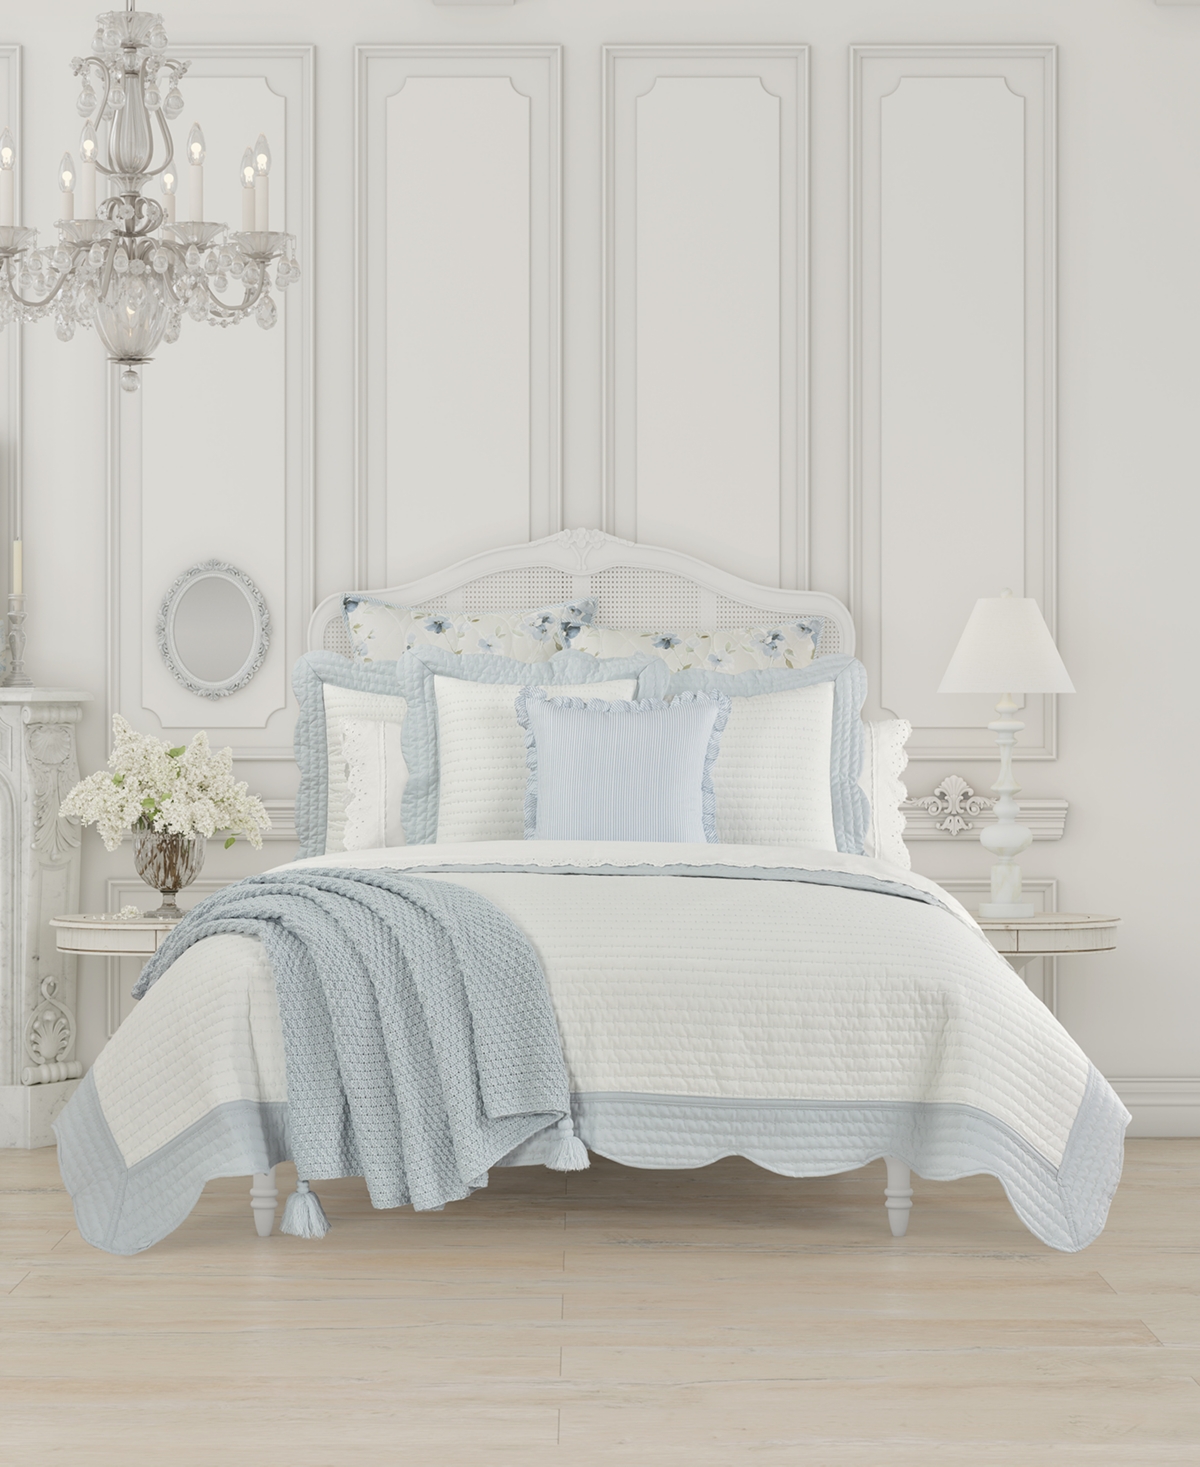 Piper & Wright Amherst Quilt, King/california King In French Blue